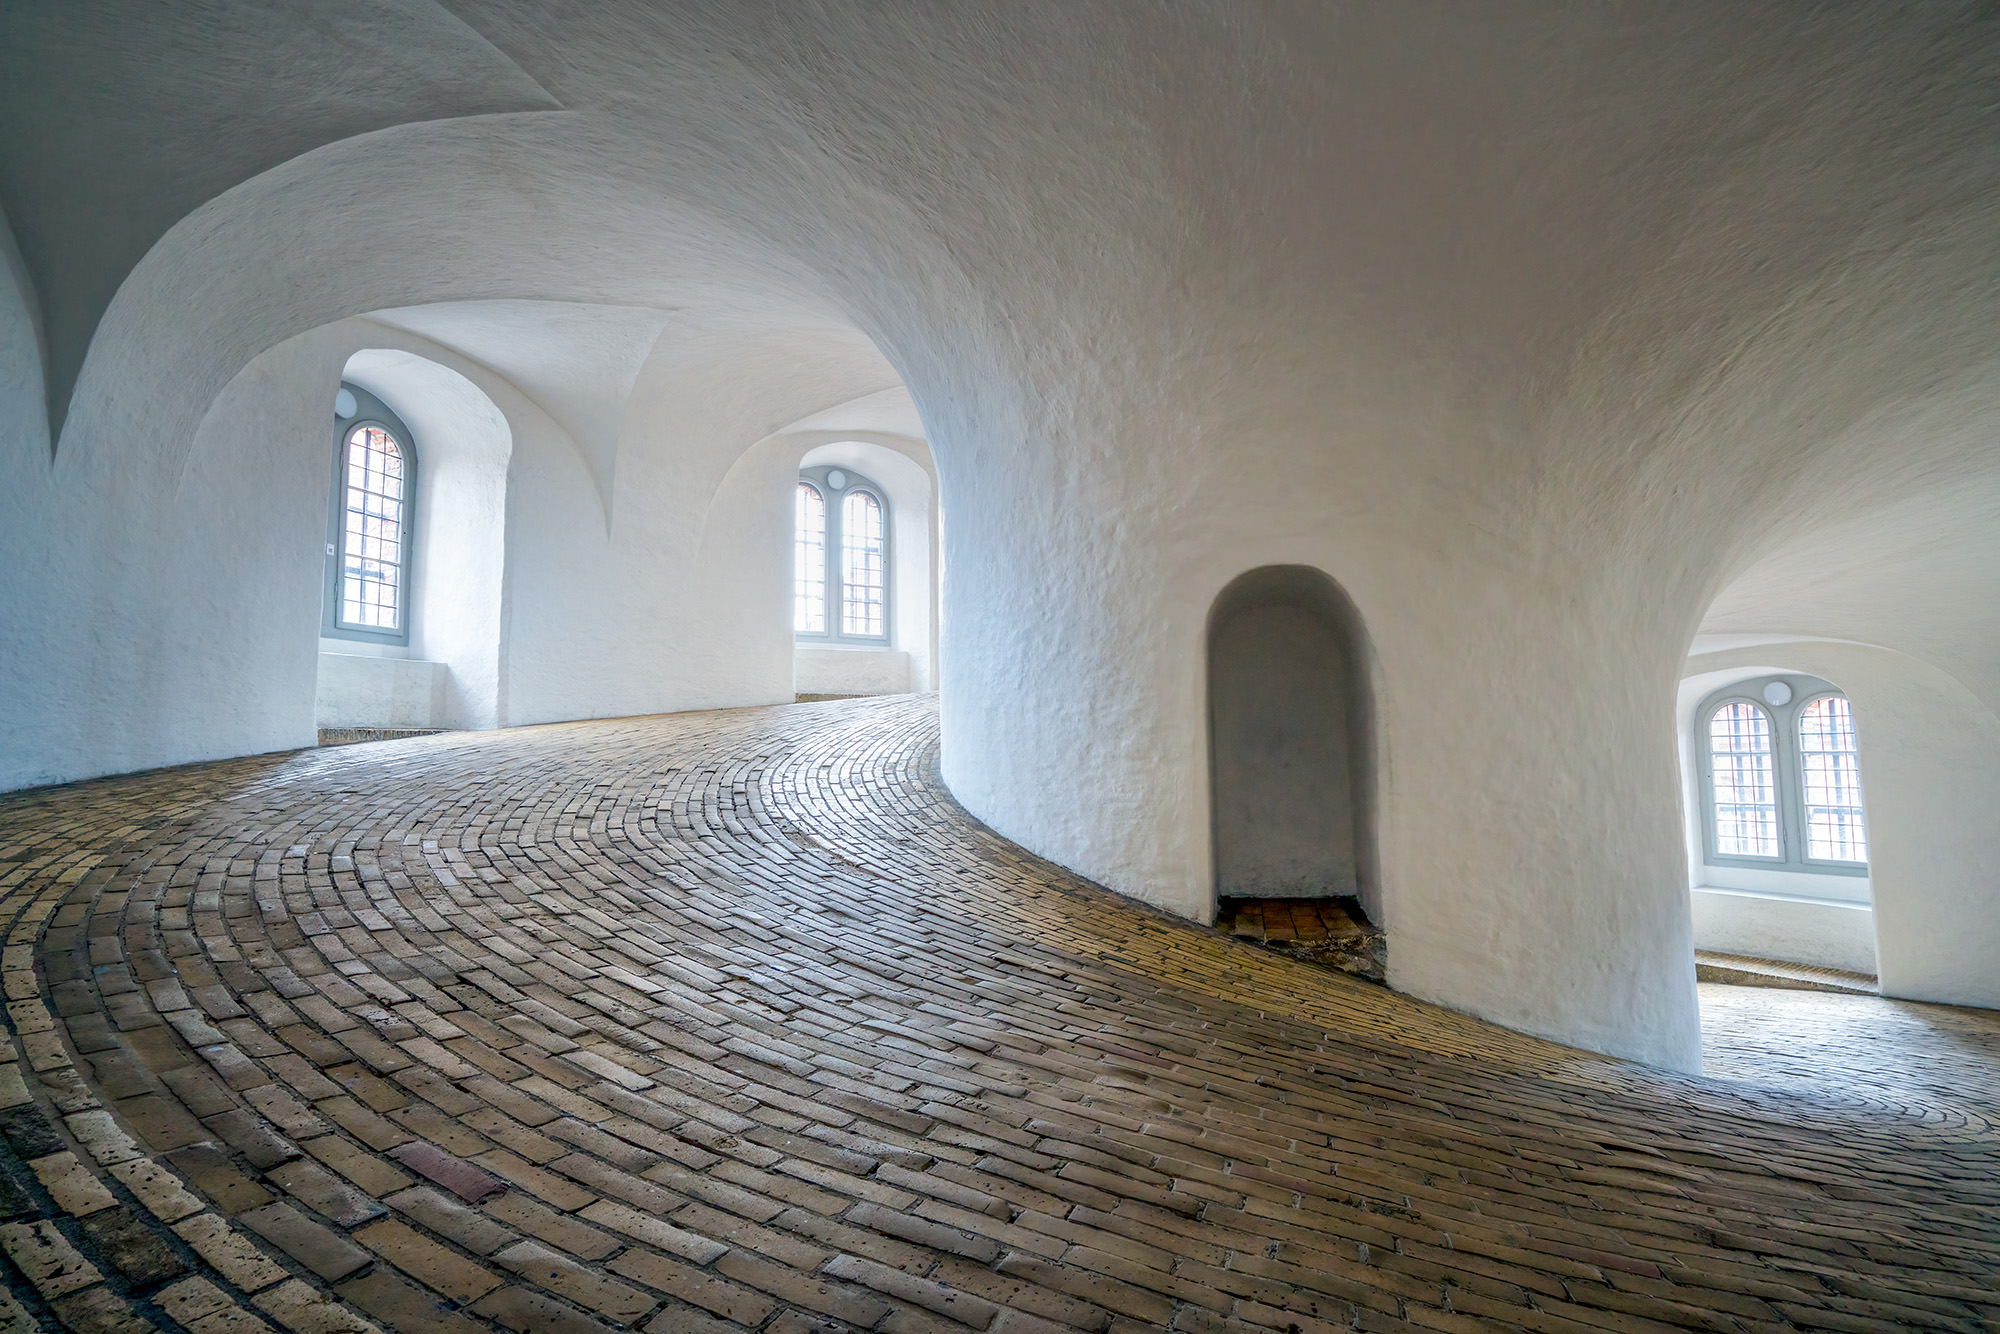 Capturing the iconic "Round Tower" in Copenhagen, Denmark, proved to be a challenge. To showcase its architectural details without...